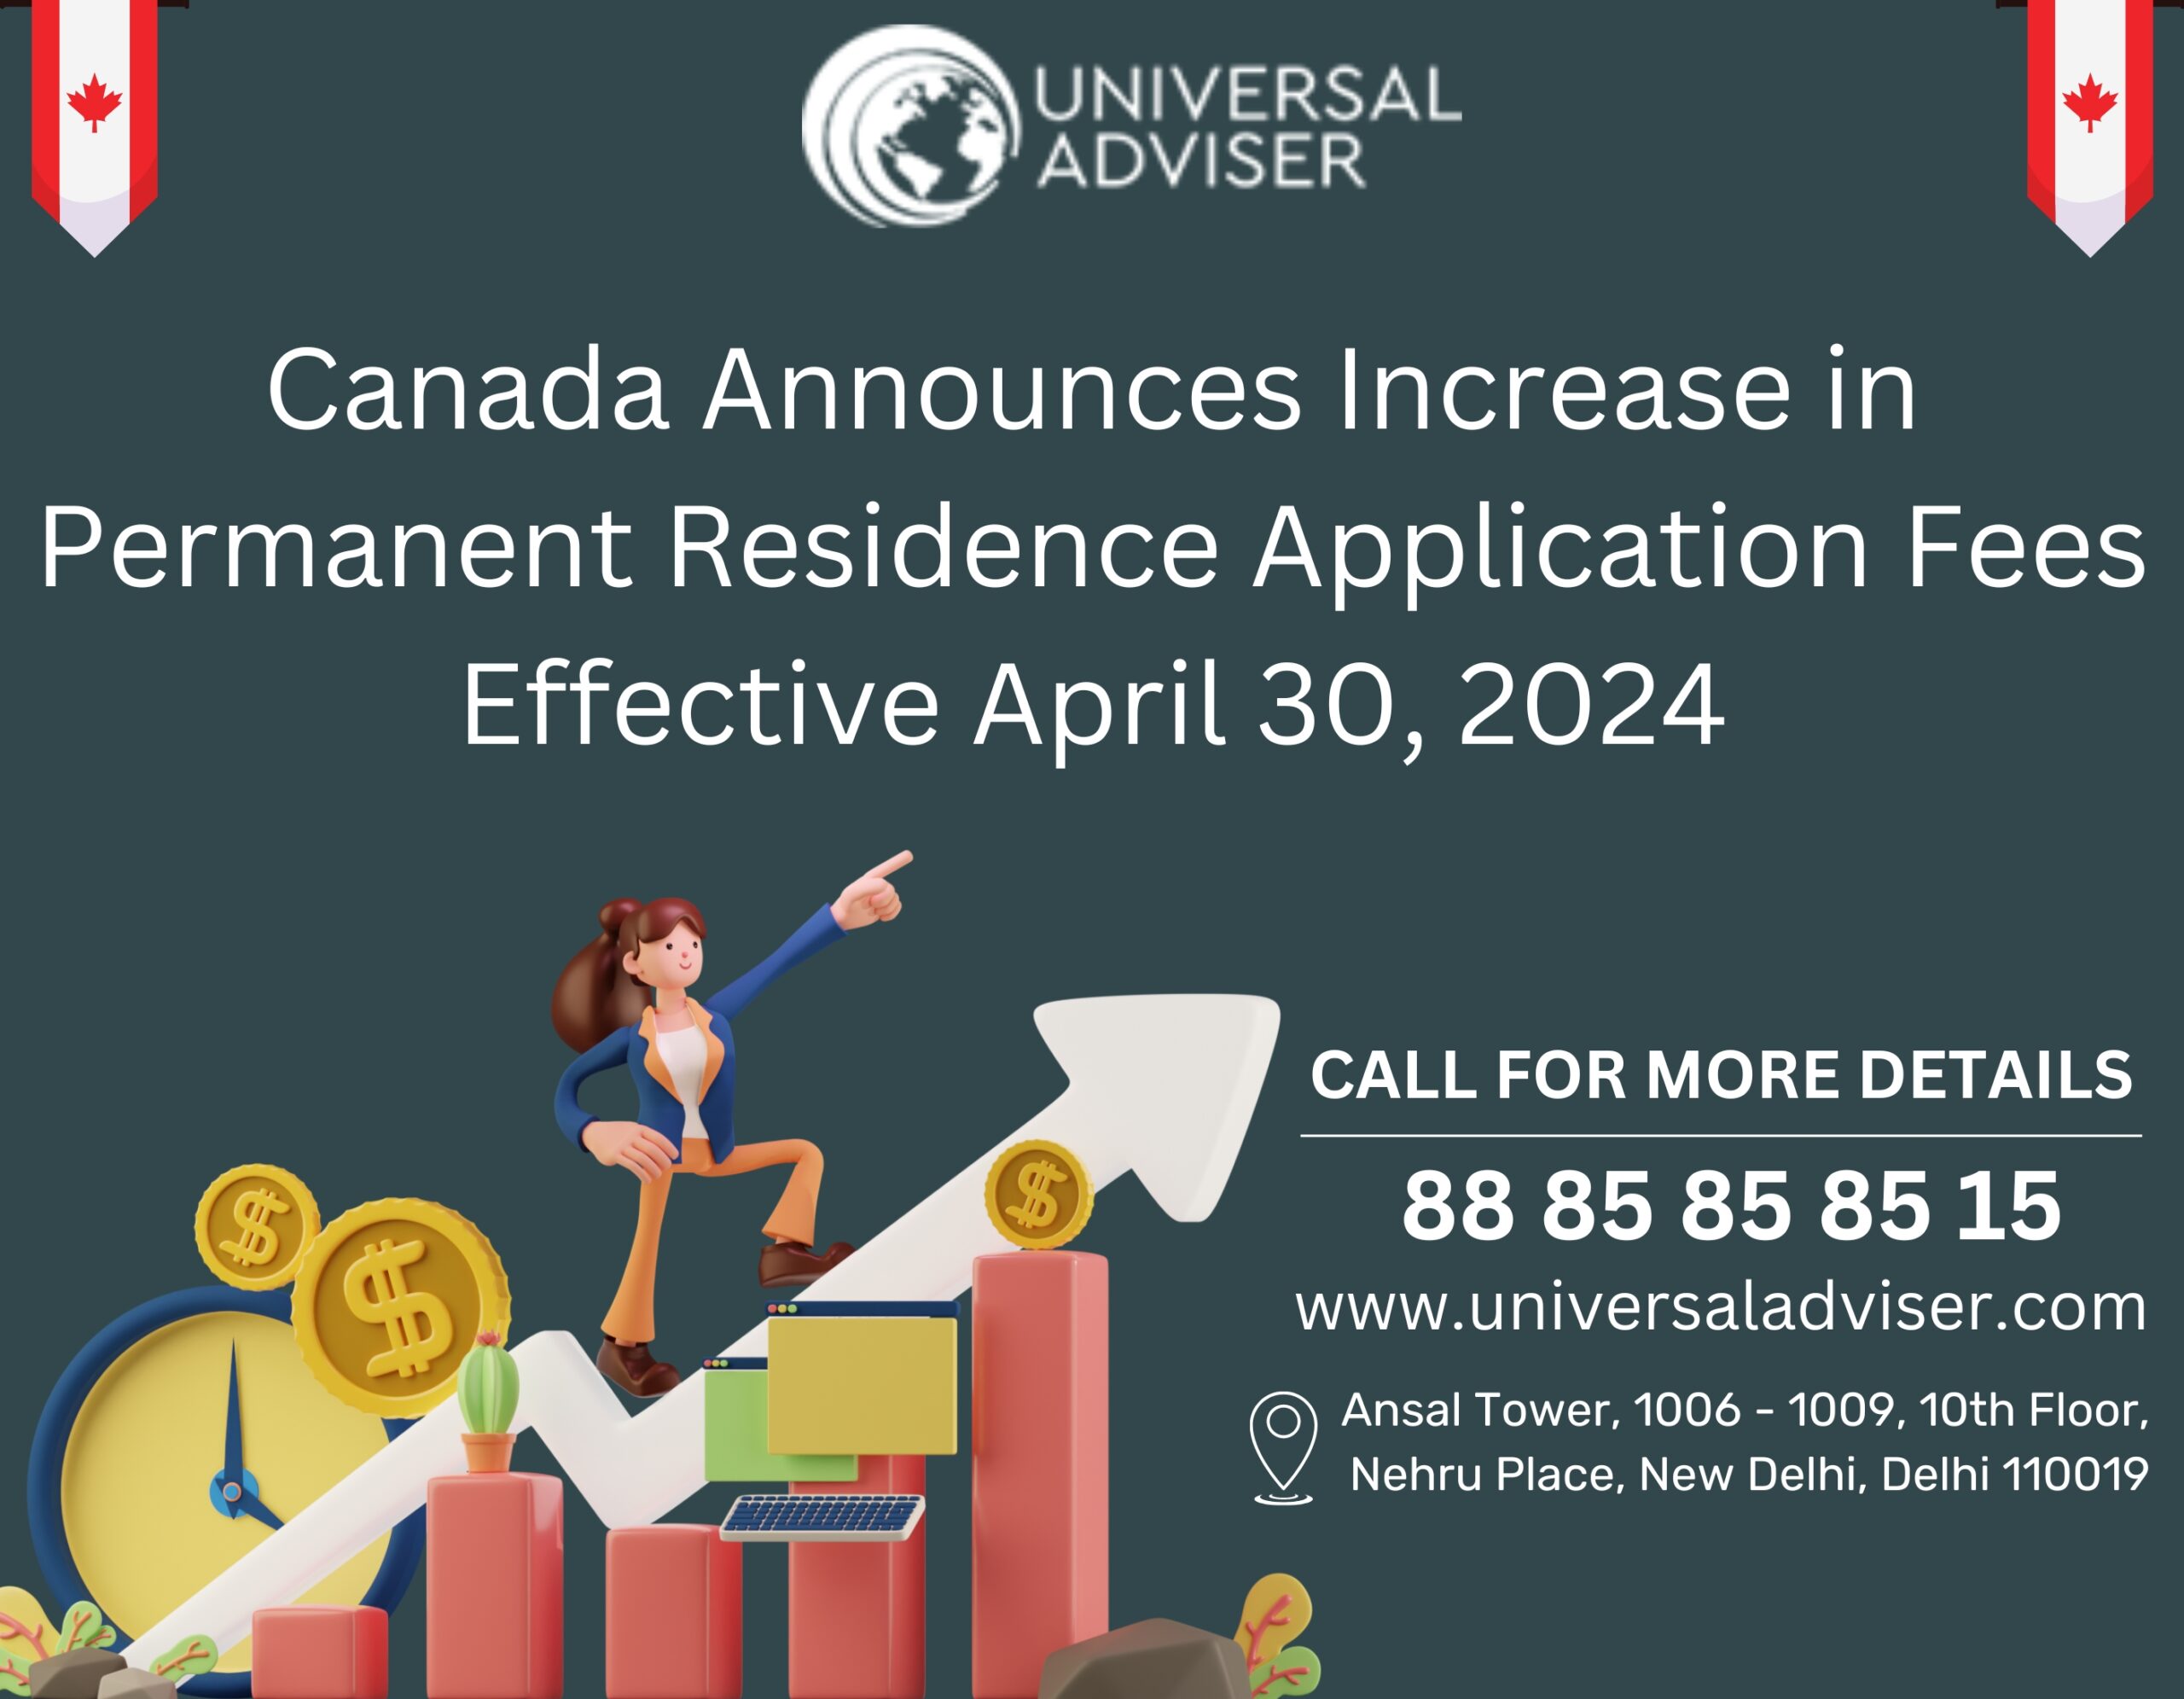 Canada Announces Increase in Permanent Residence Application Fees Effective April 30, 2024